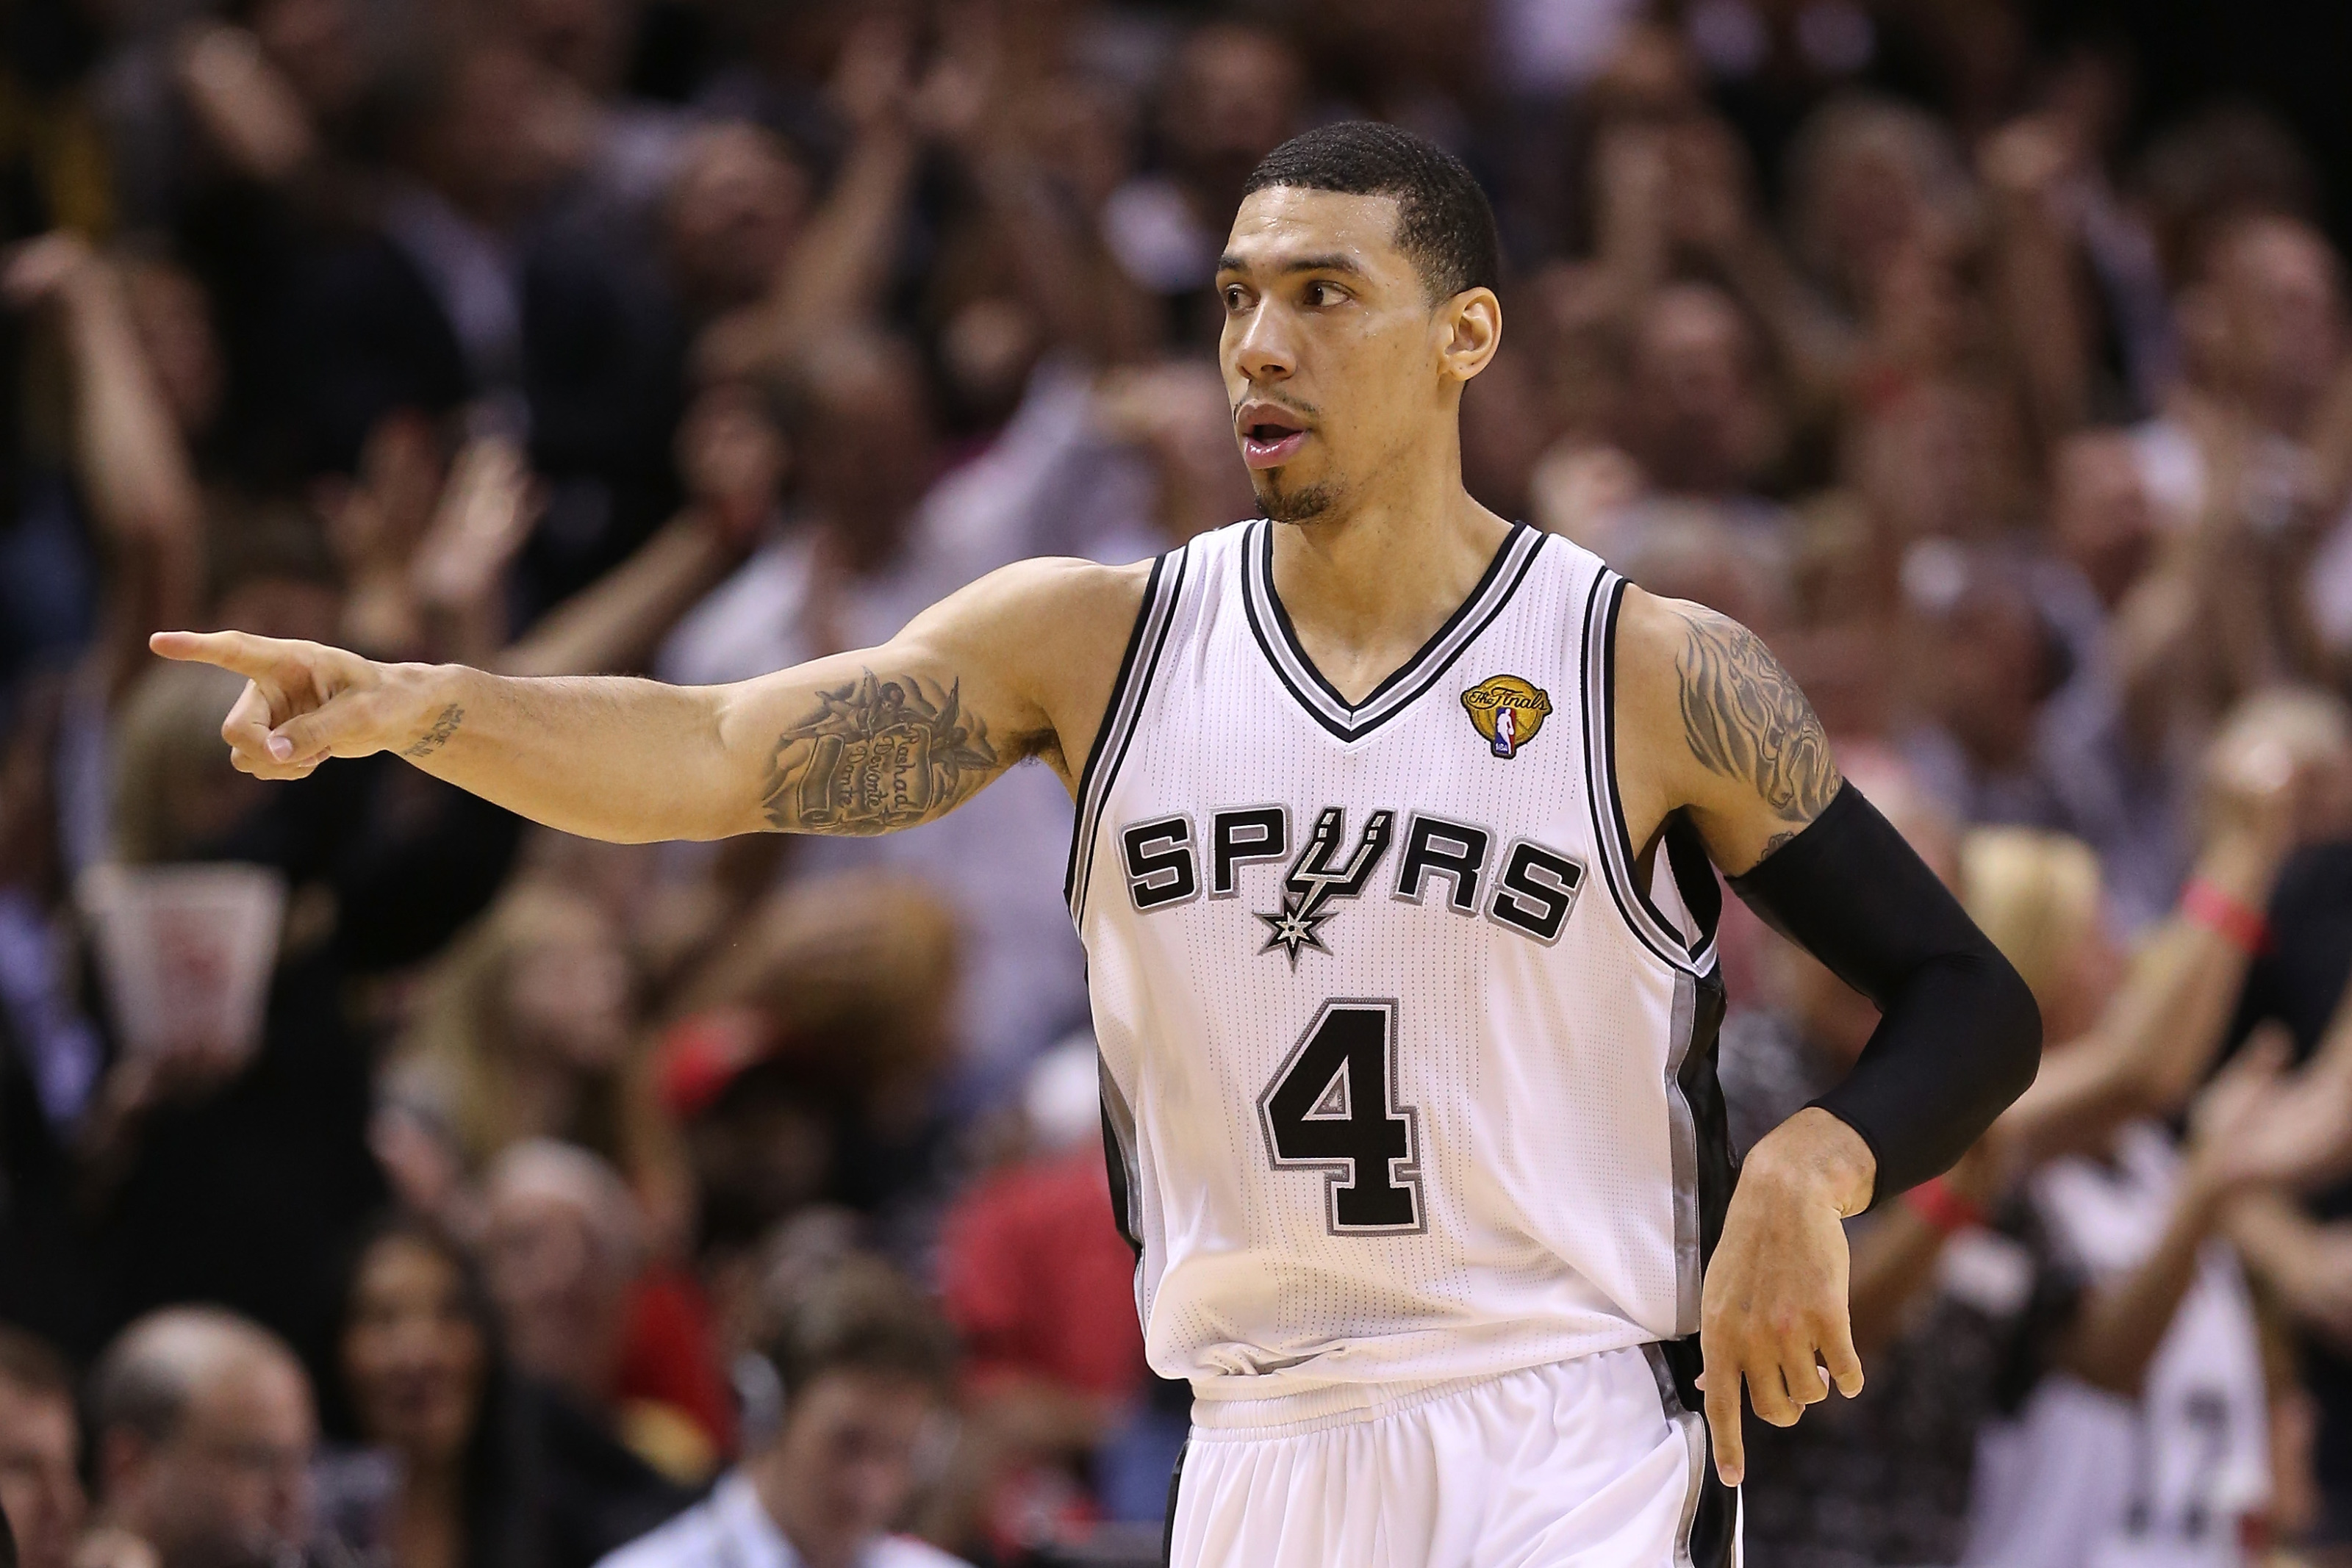 How Many Teams Has Danny Green Played For